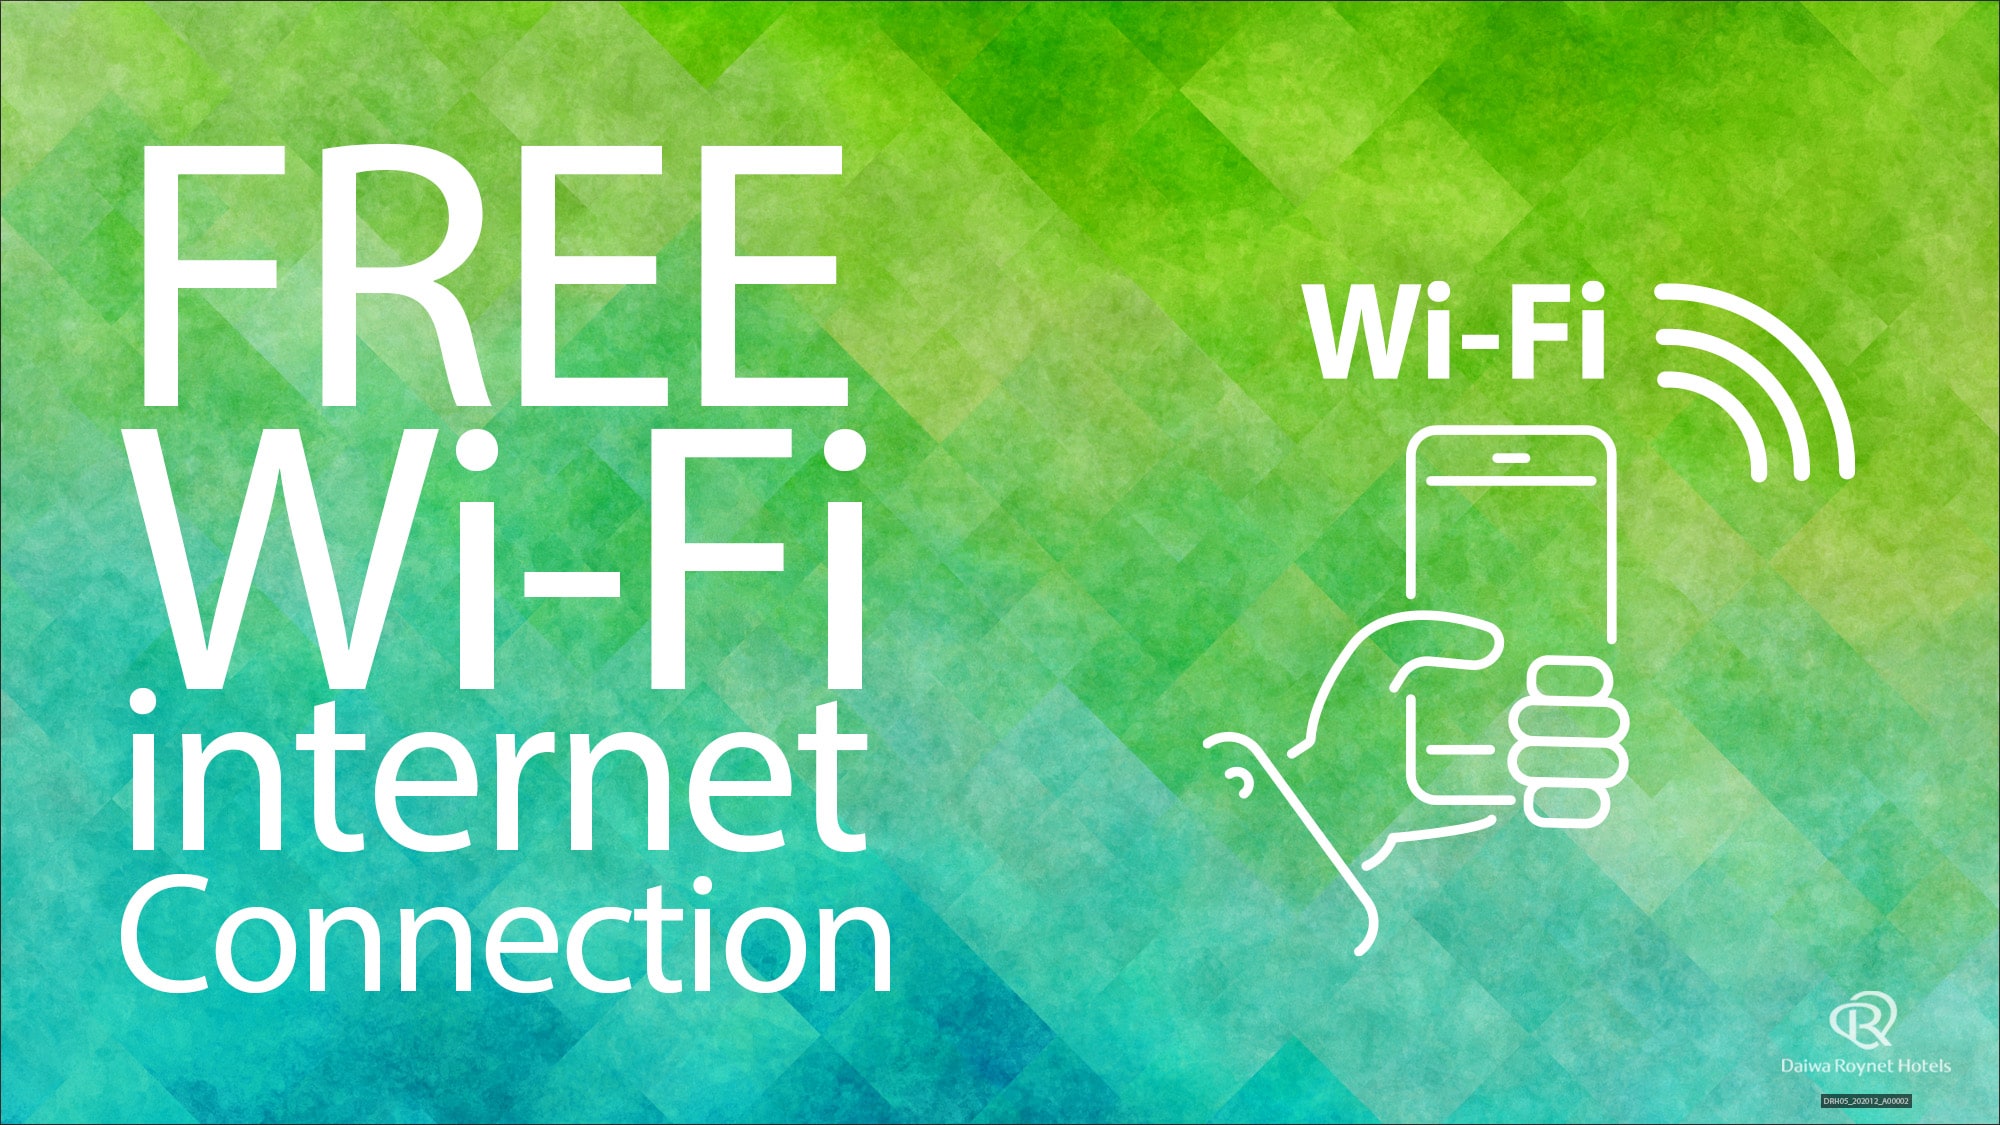 Wi-fi available throughout